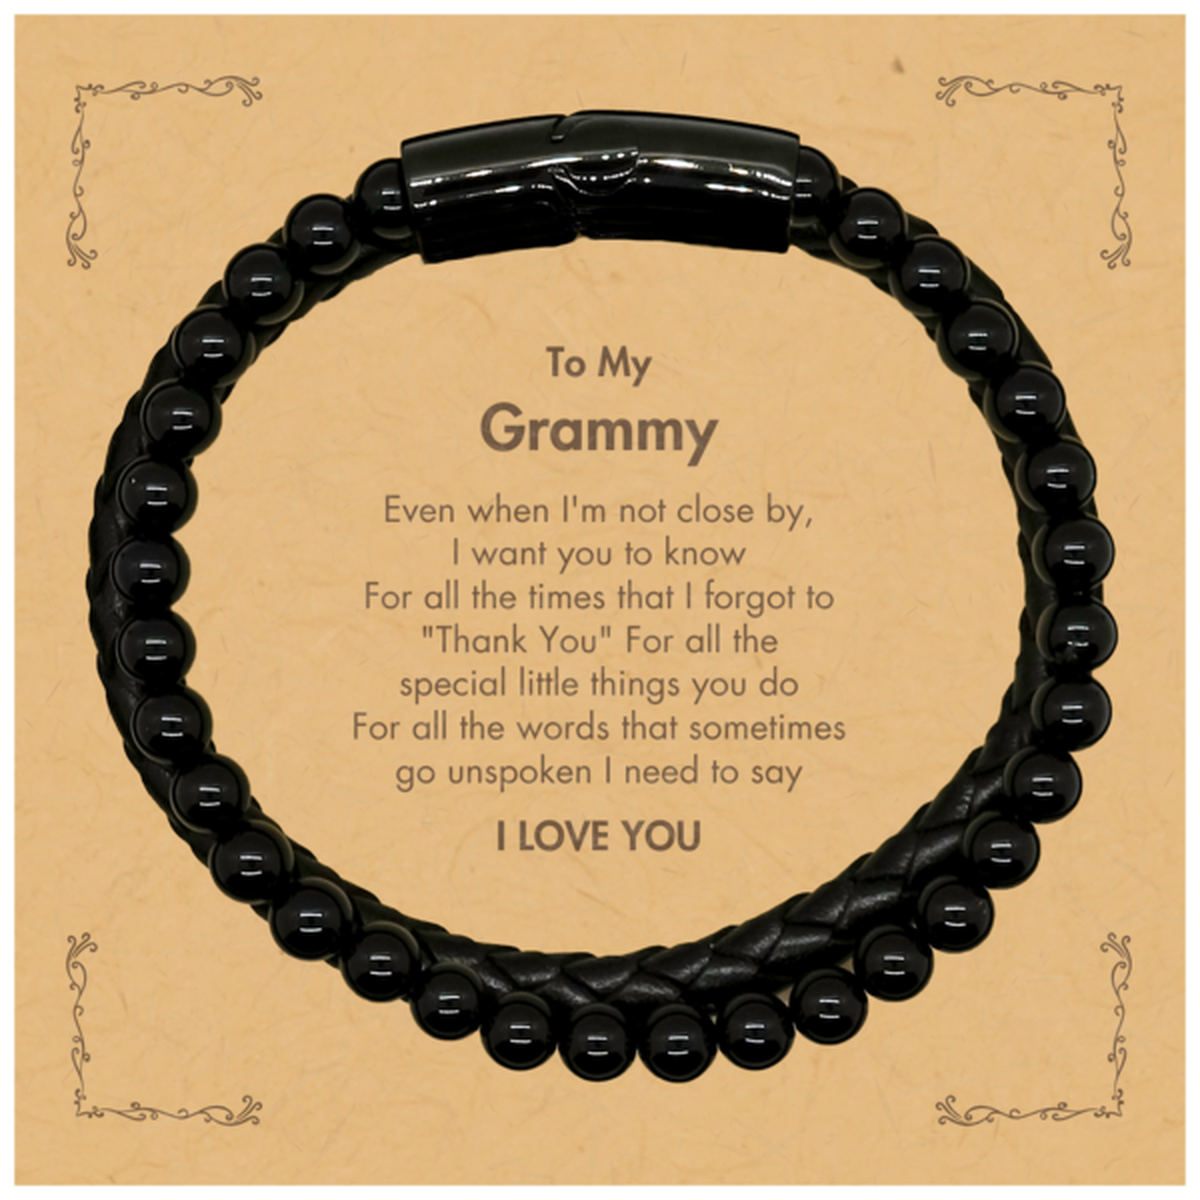 Thank You Gifts for Grammy, Keepsake Stone Leather Bracelets Gifts for Grammy Birthday Mother's day Father's Day Grammy For all the words That sometimes go unspoken I need to say I LOVE YOU